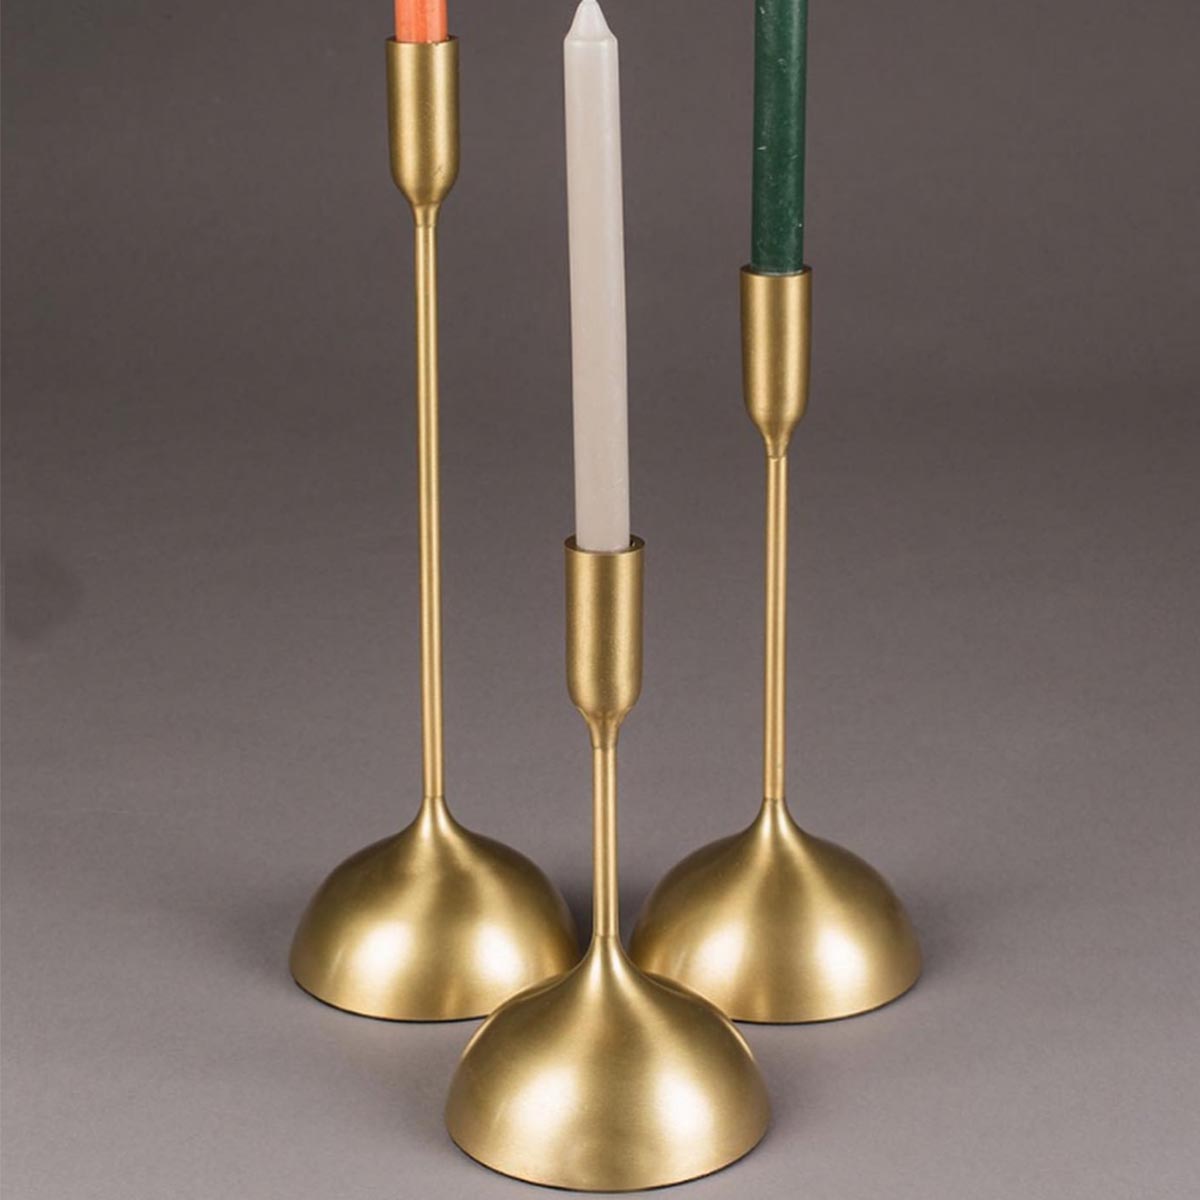 Zuiver Set of 3 Candle Holders